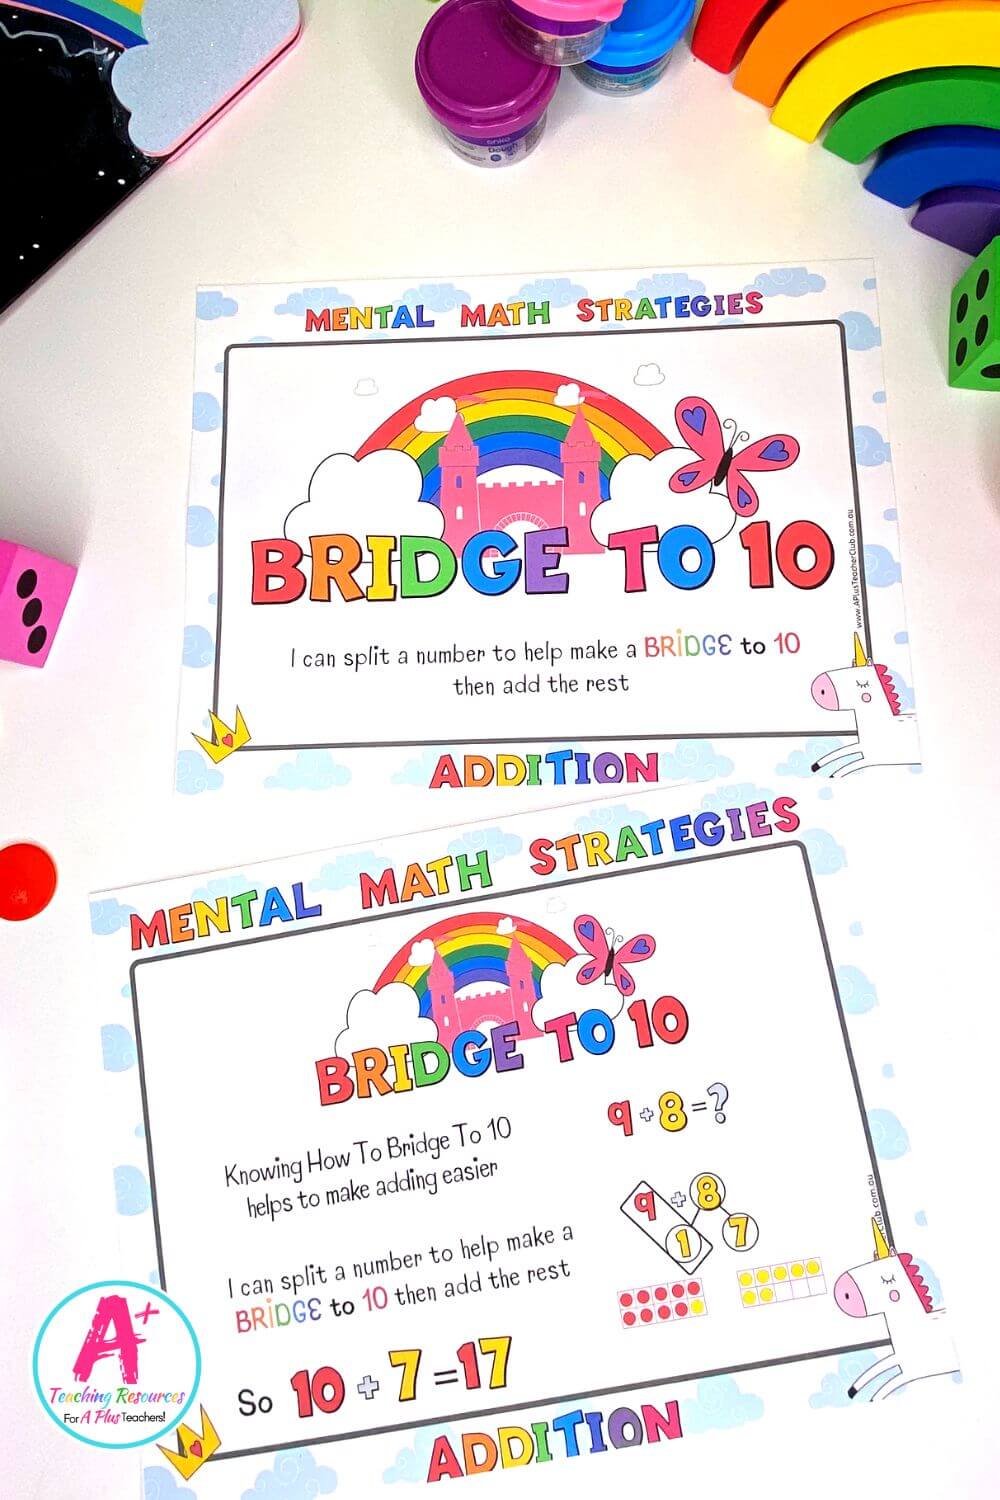 Bridging To 10 Mental Maths Strategy Posters - Rainbow Theme